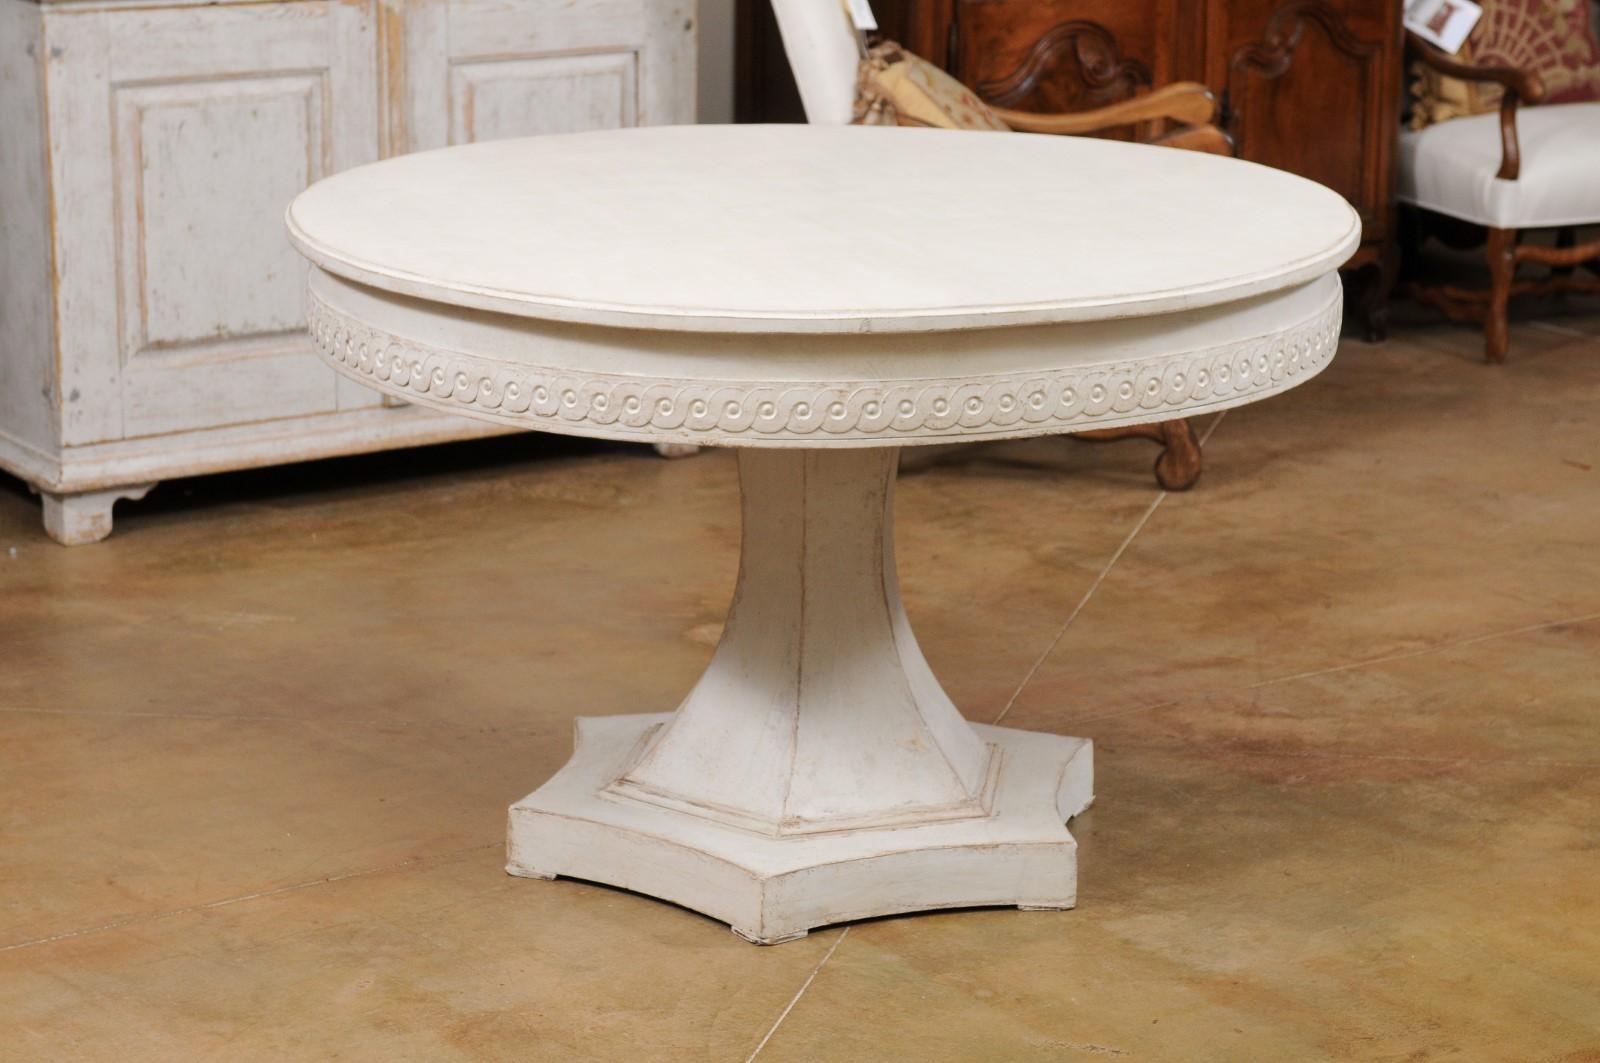 A Swedish Neoclassical style pedestal table from the mid 19th century, with guilloche motifs and hexagonal base. Created in Sweden during the second quarter of the 19th century, this table features a circular top sitting above an apron carved with a